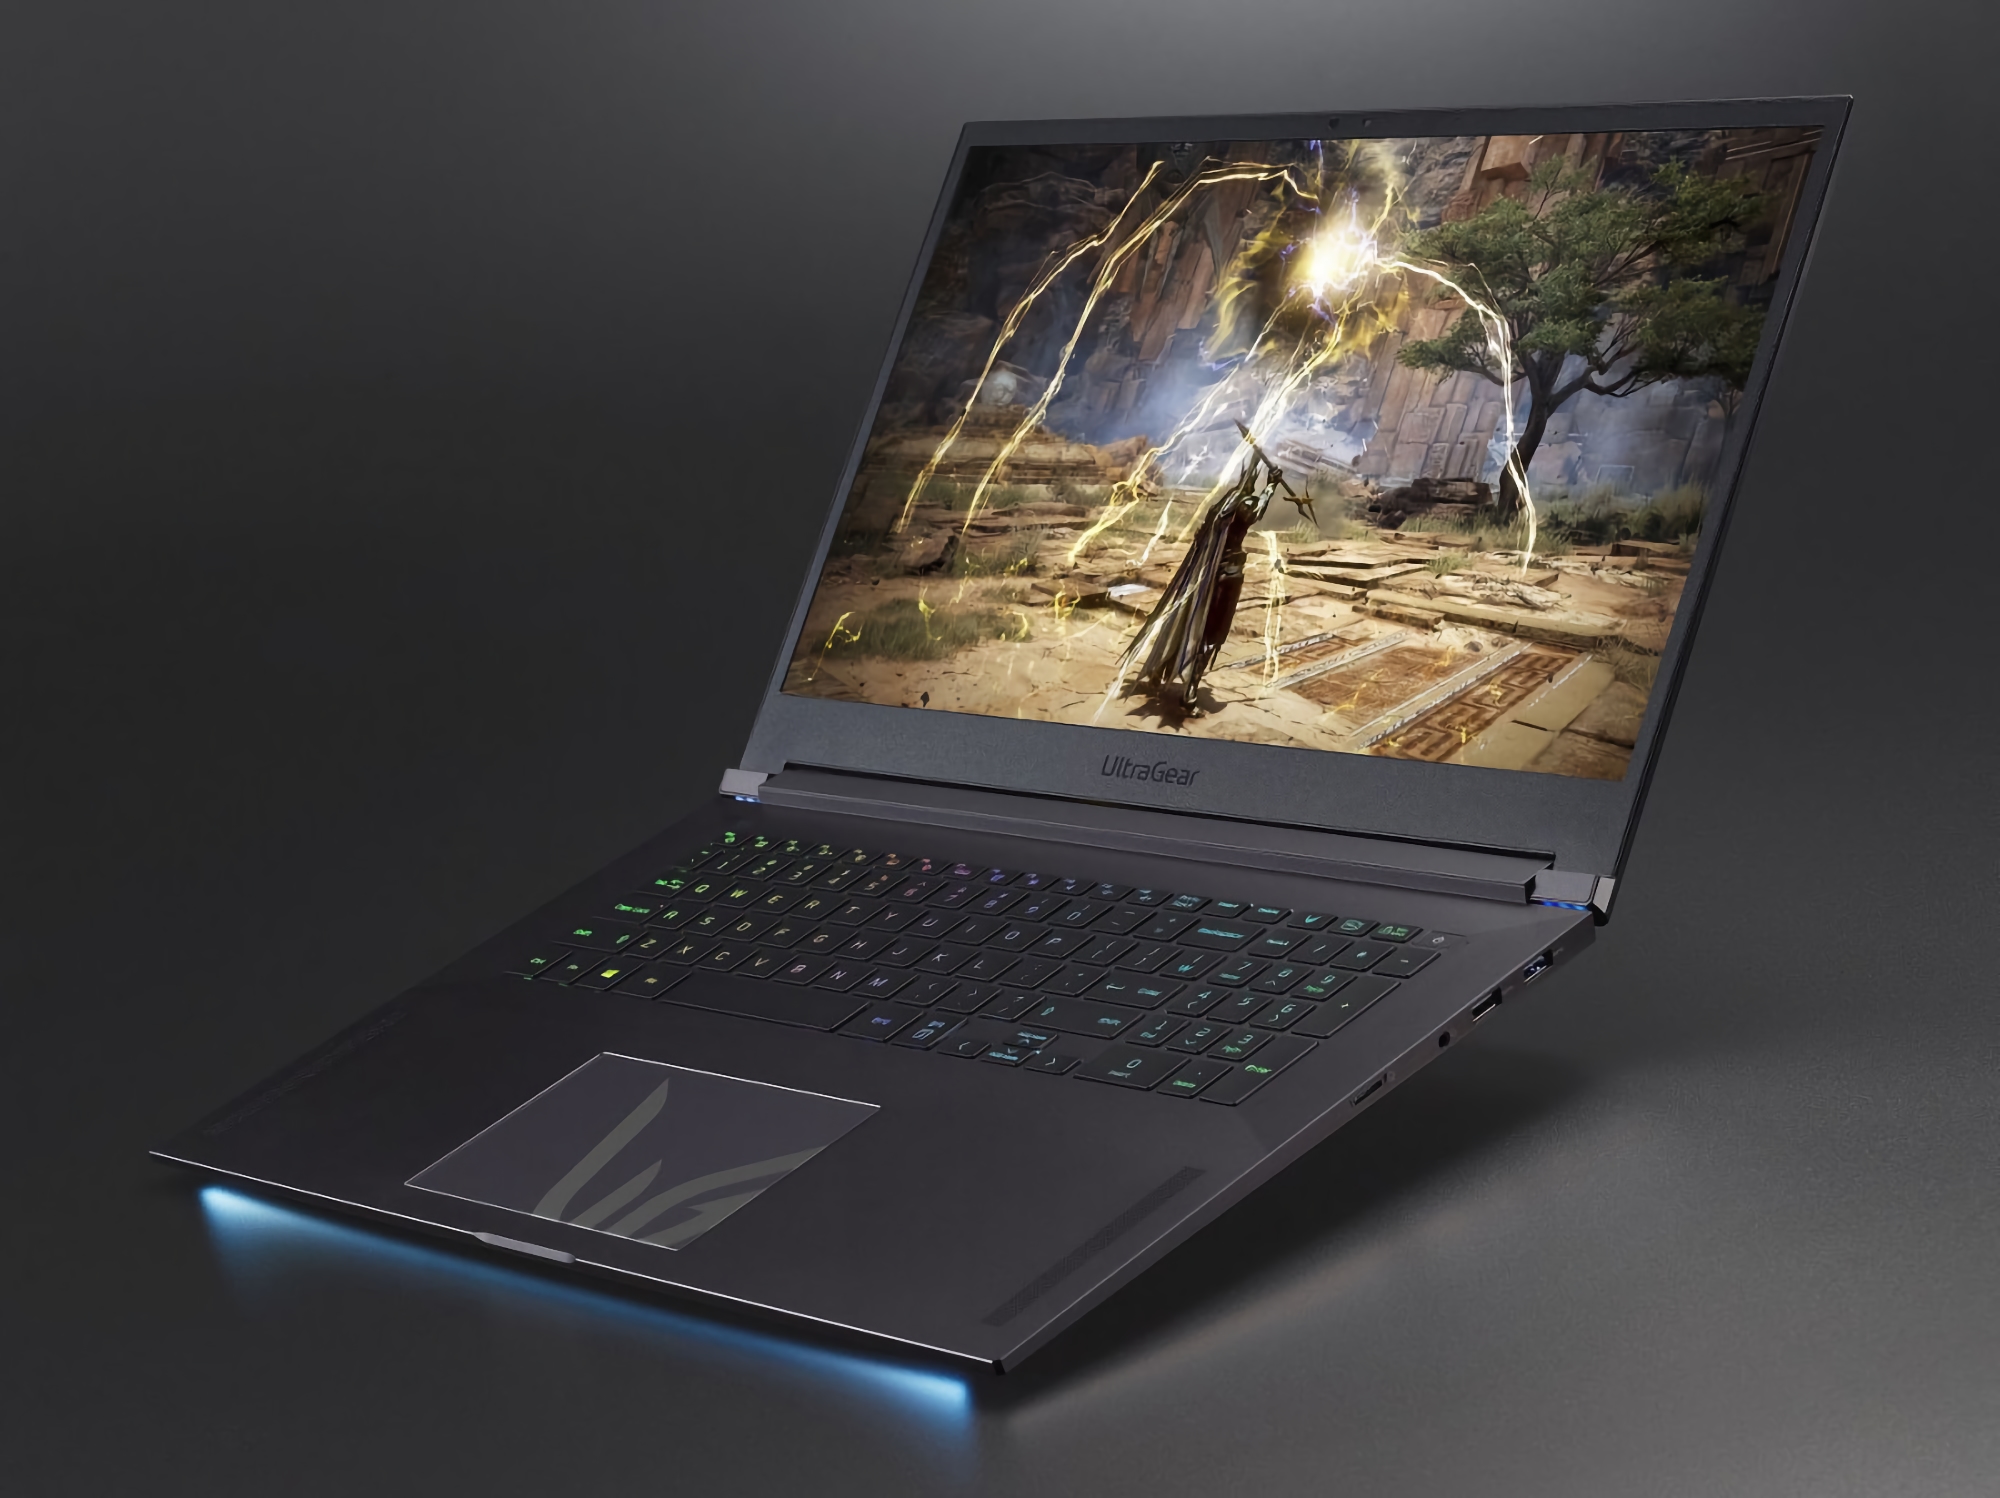 17-inch 300Hz screen, Intel Tiger Lake H chip and GeForce RTX 3080 graphics: LG unveils its first gaming laptop